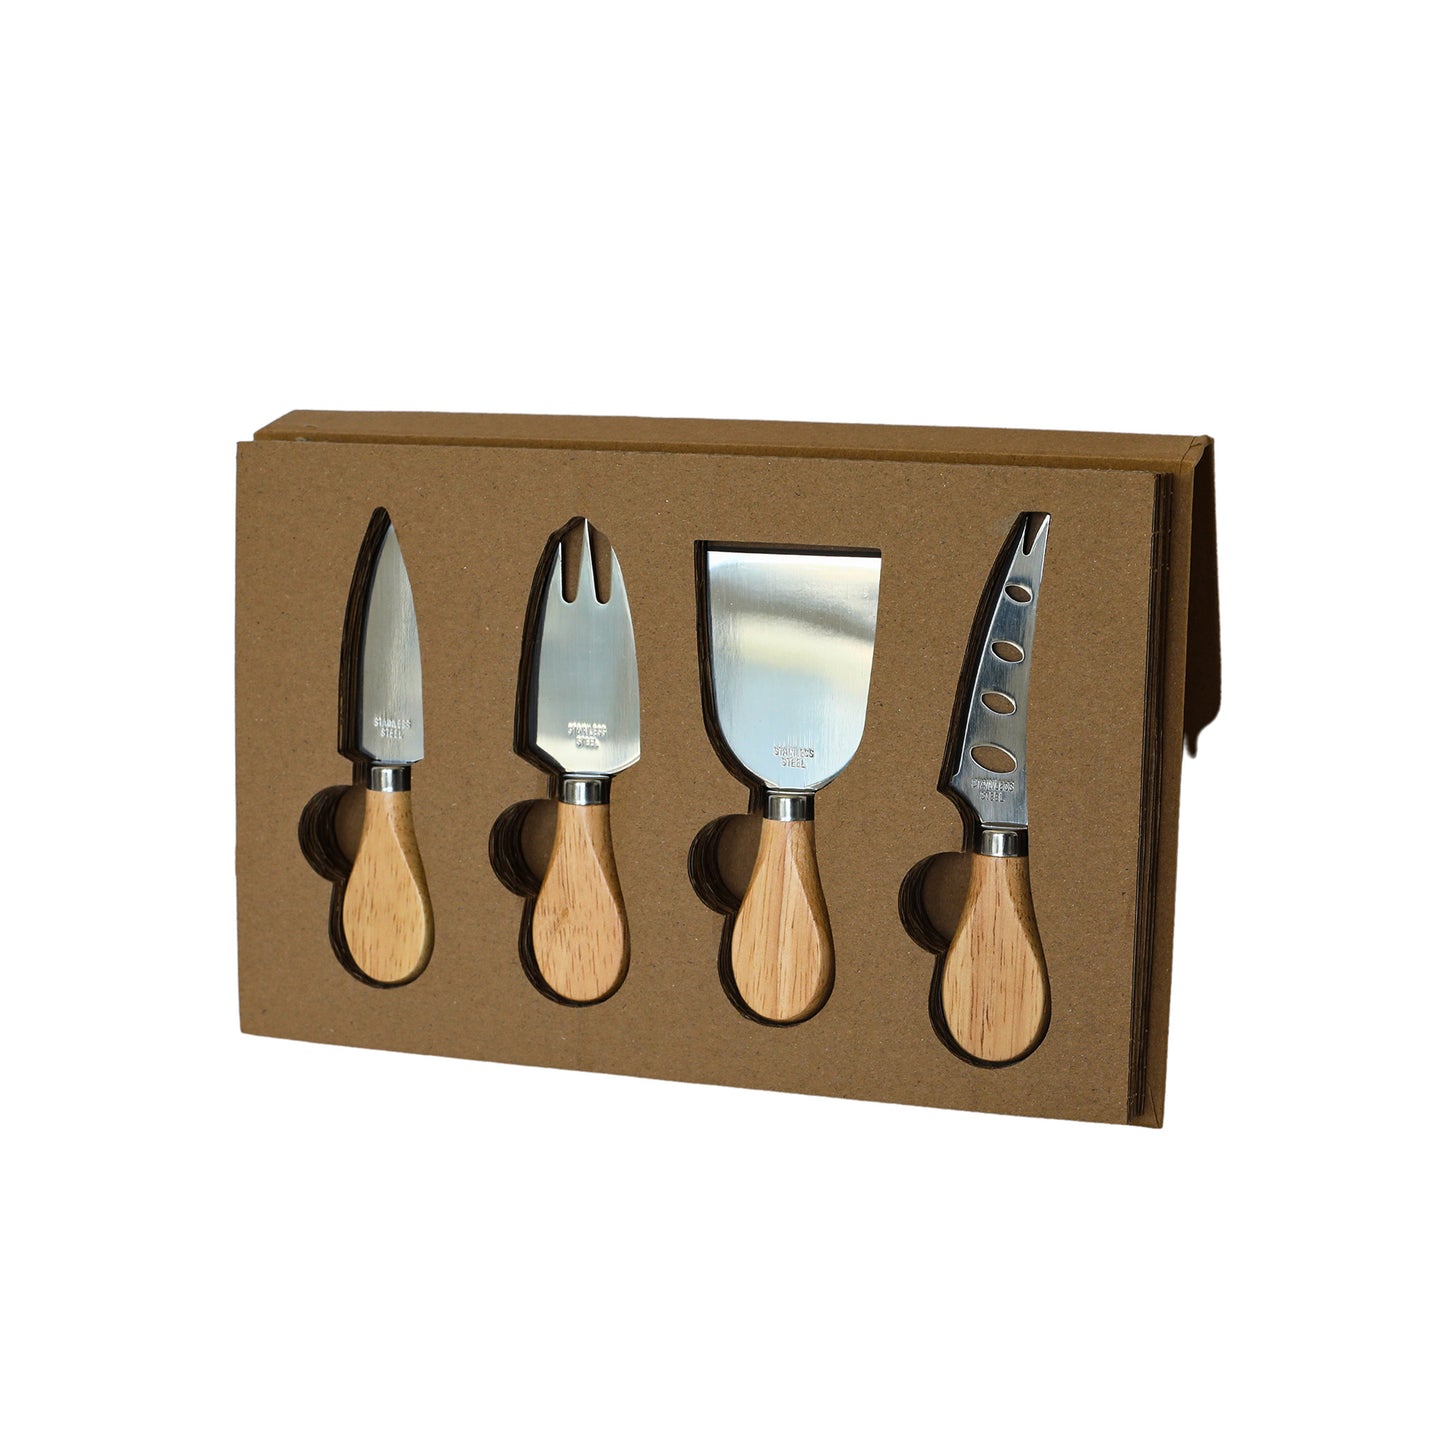 4-Piece Cheese Serving Set with Wooden Handles